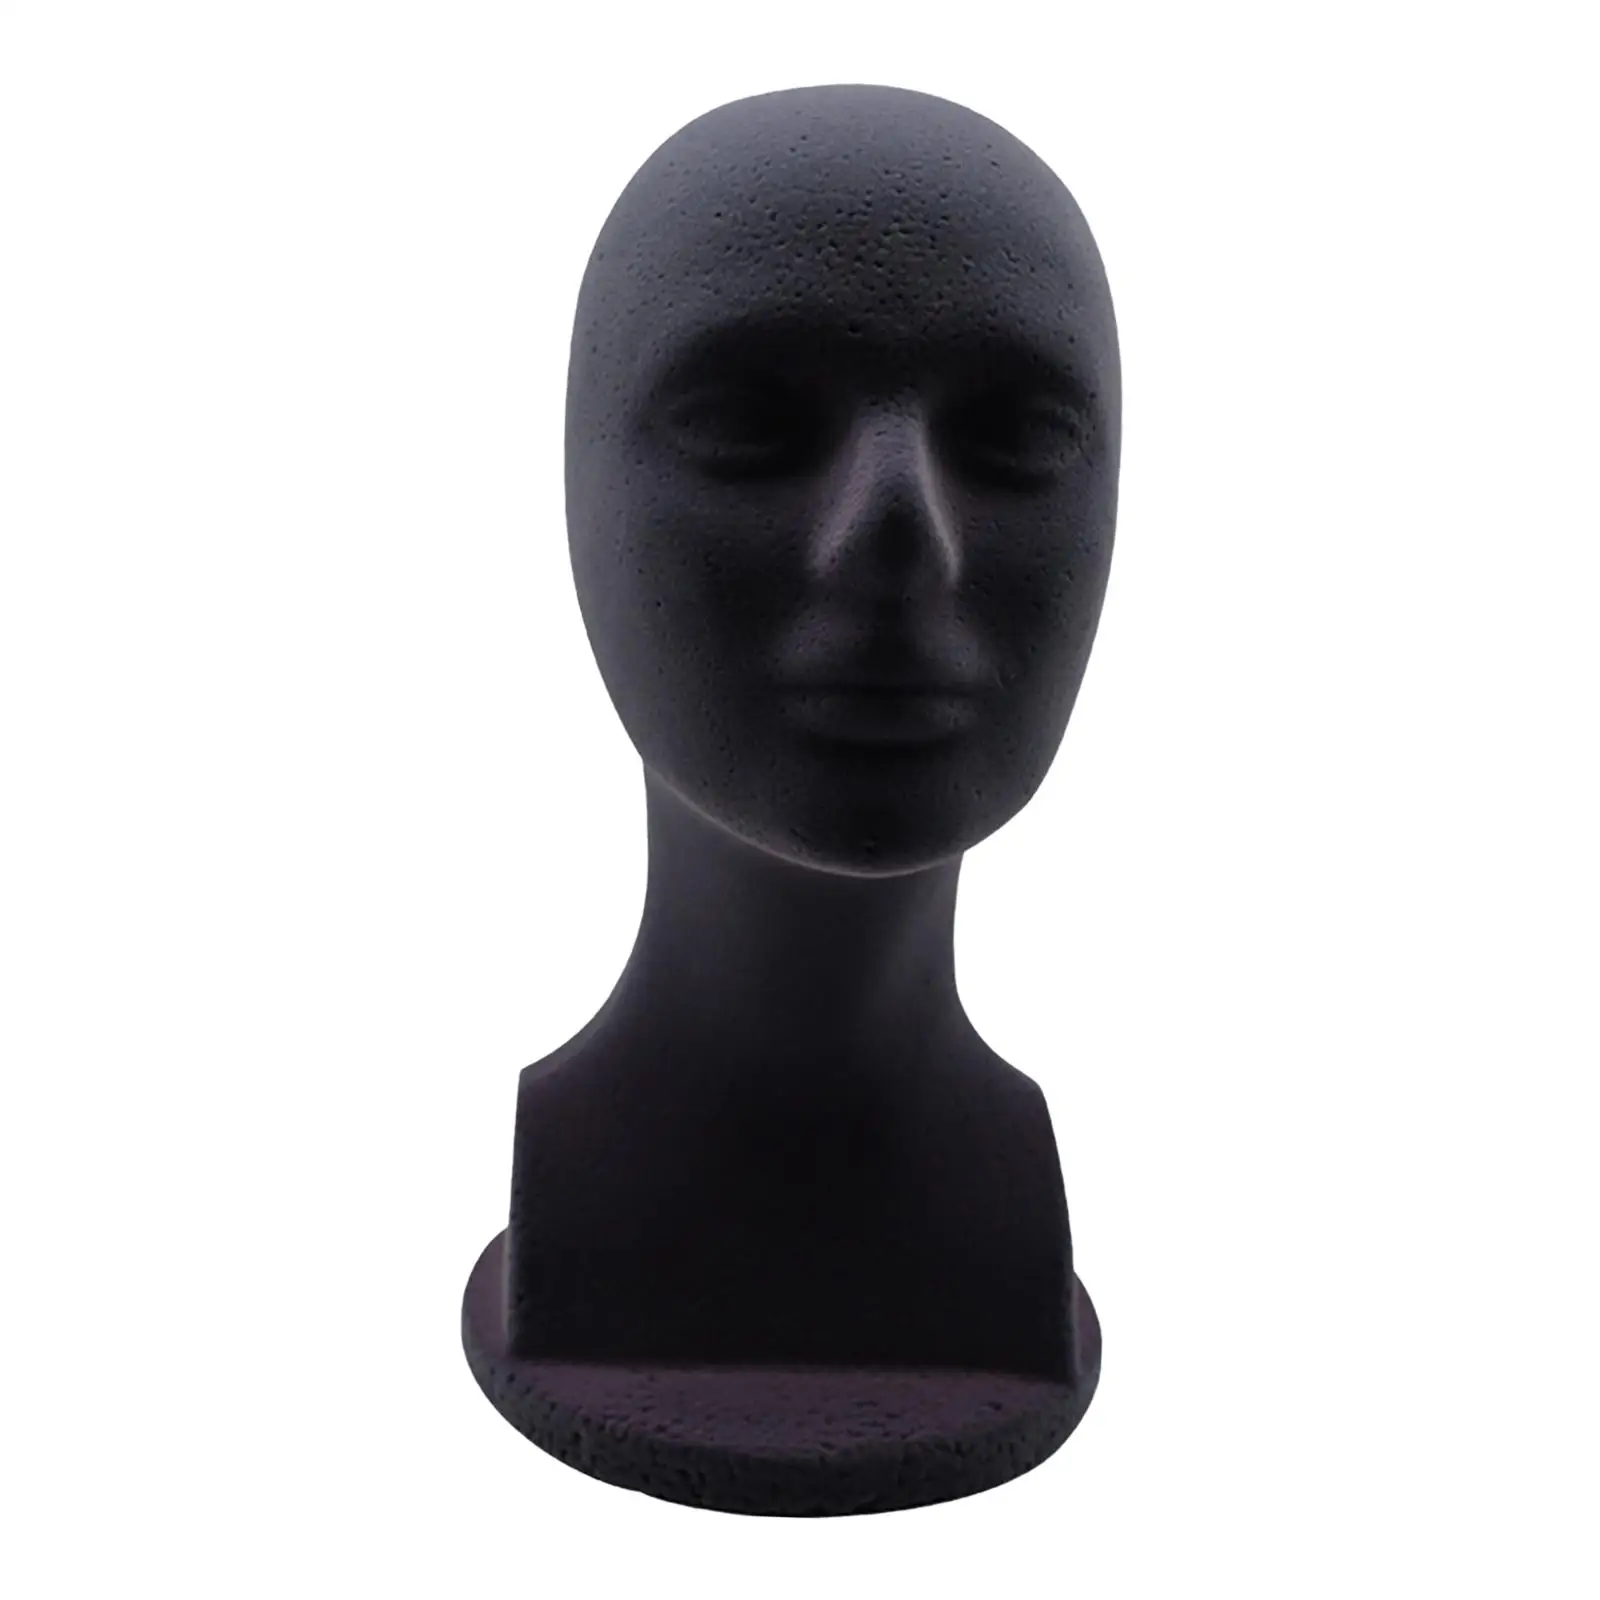 Man Styrofoam Mannequin Head Model Hat Display Stand Black 48.5cm Head Circumference Accessories 12.6 inch Tall DIY Stable Base